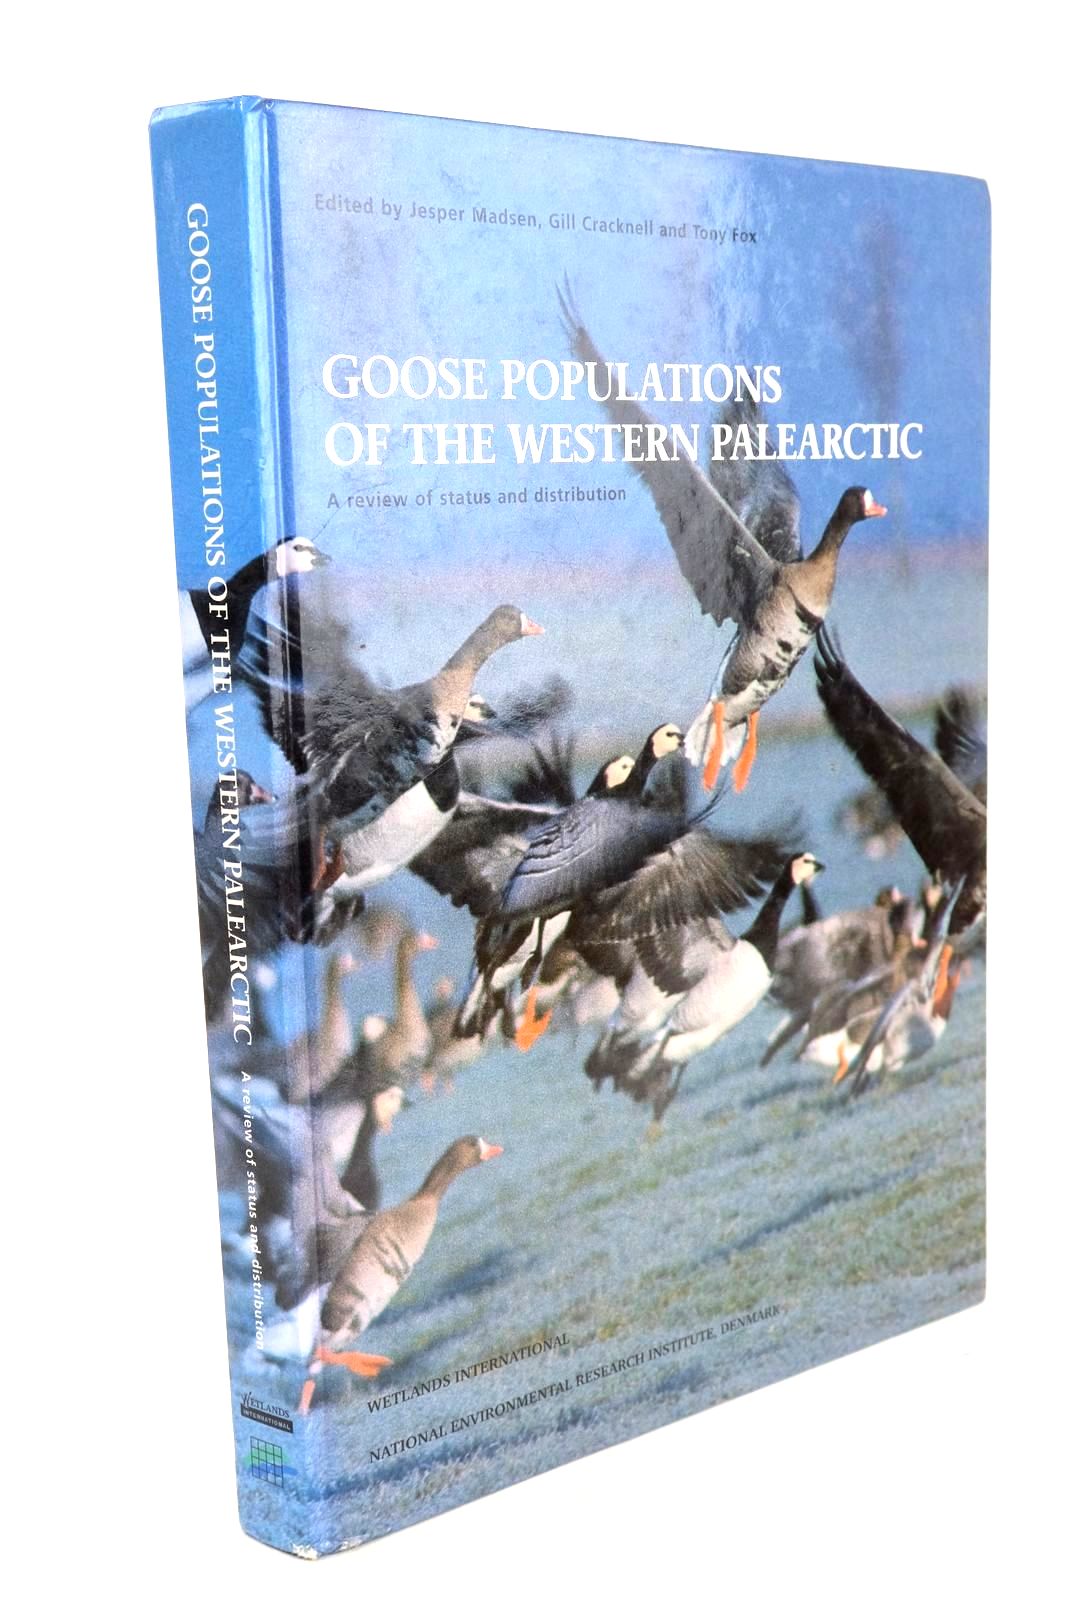 Photo of GOOSE POPULATIONS OF THE WESTERN PALEARCTIC: A REVIEW OF STATUS AND DISTRIBUTION written by Madsen, Jesper Majbom Cracknell, Gill Fox, Tony published by National Environmental Research Institute (STOCK CODE: 1327289)  for sale by Stella & Rose's Books